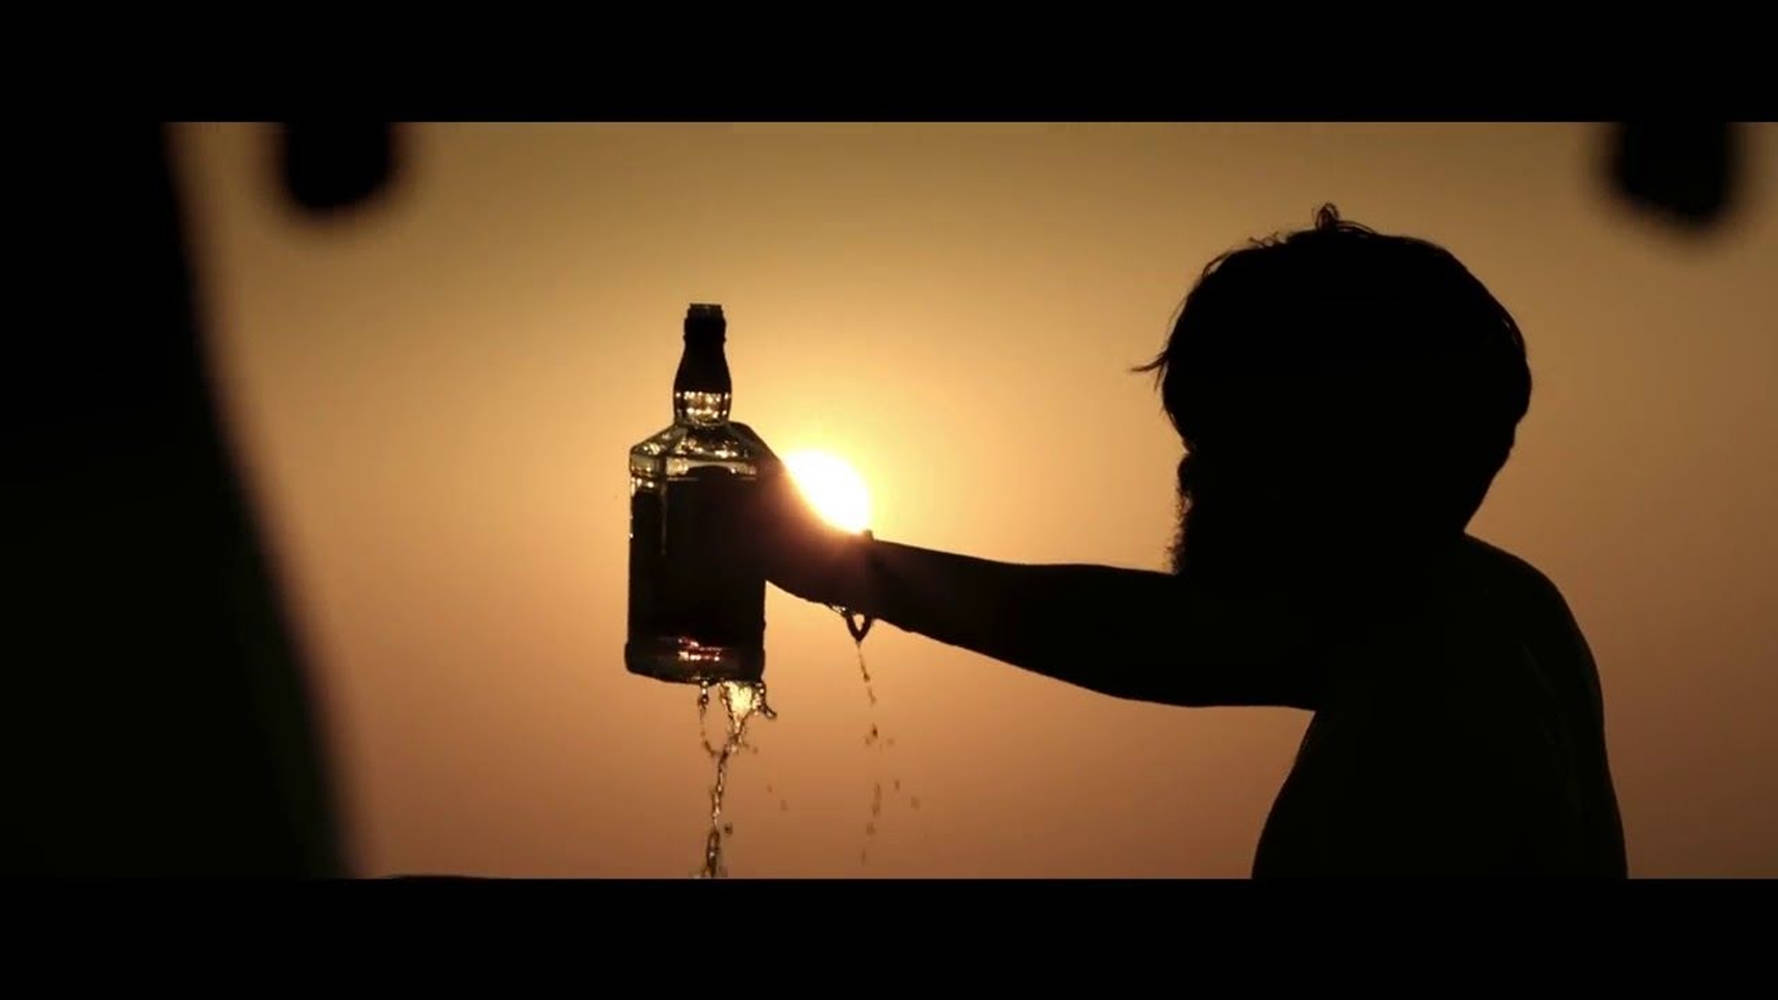 Download Adithya Varma's Silhouette With An Alcoholic Drink ...